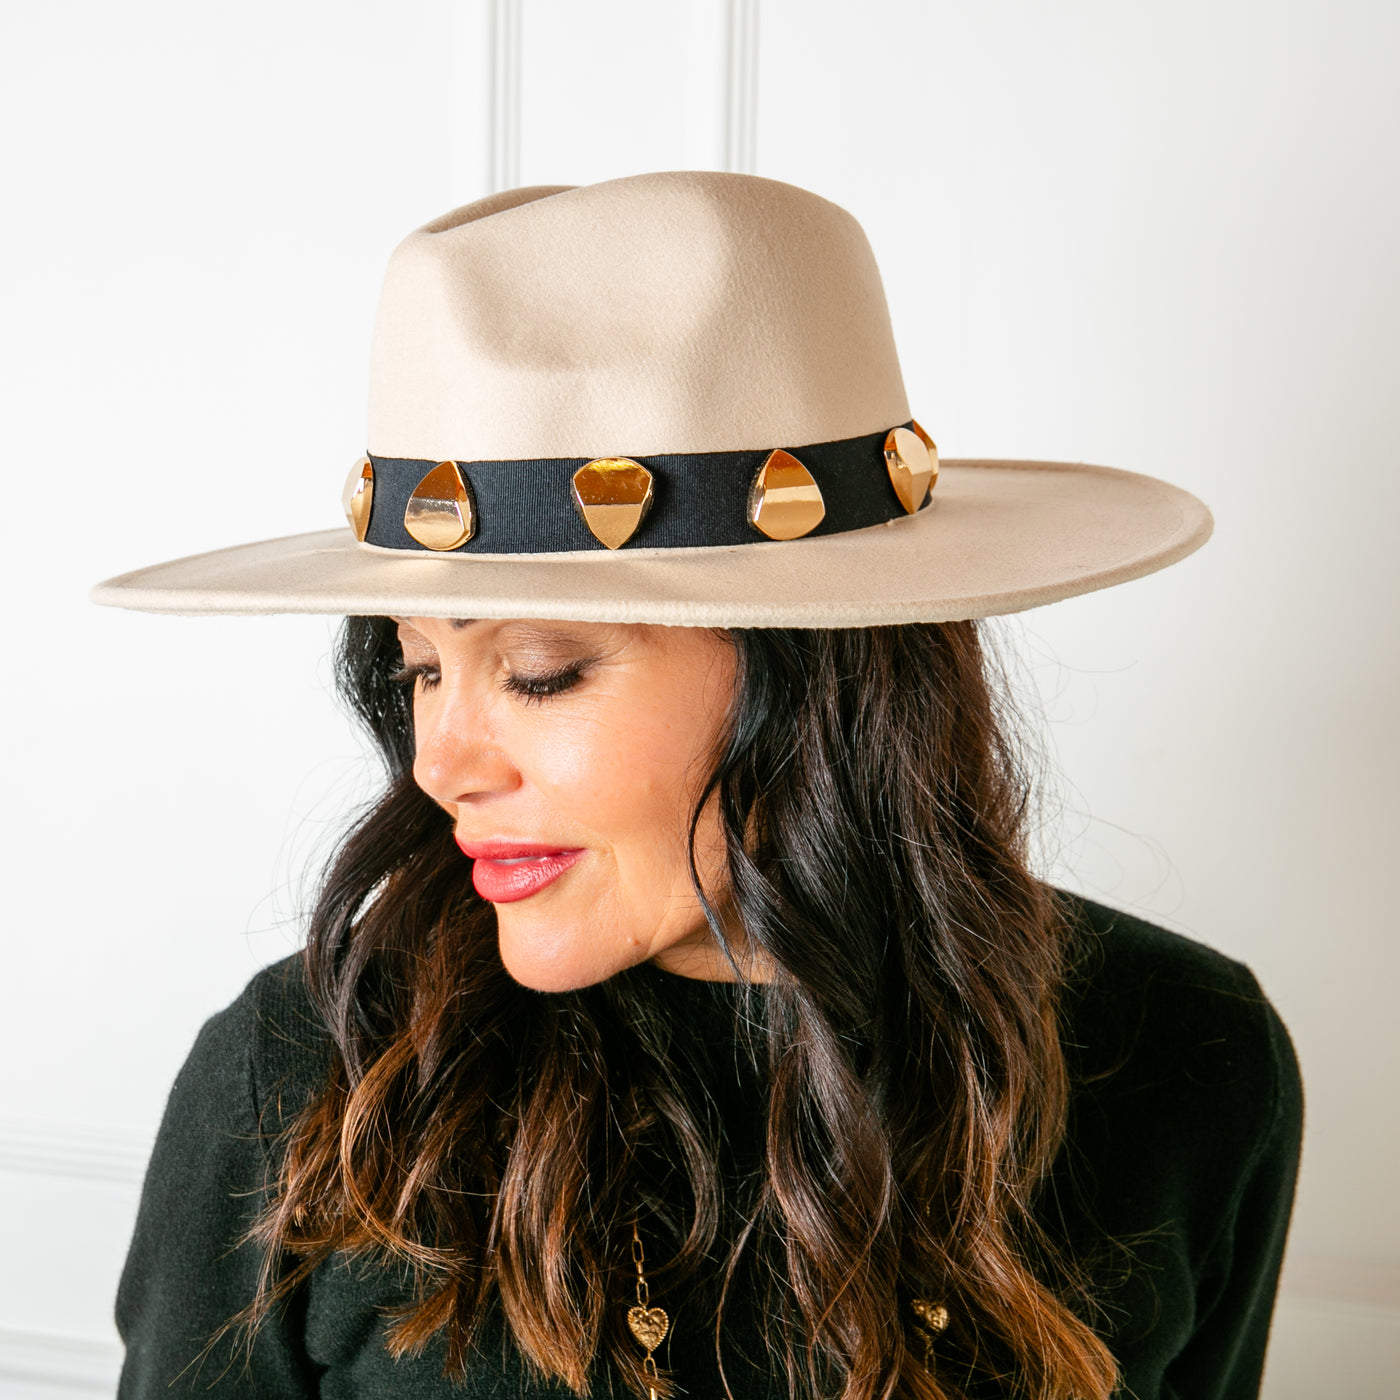 The beige Fedora Hat, made from a felted material for a structured look, perfect for making a statement